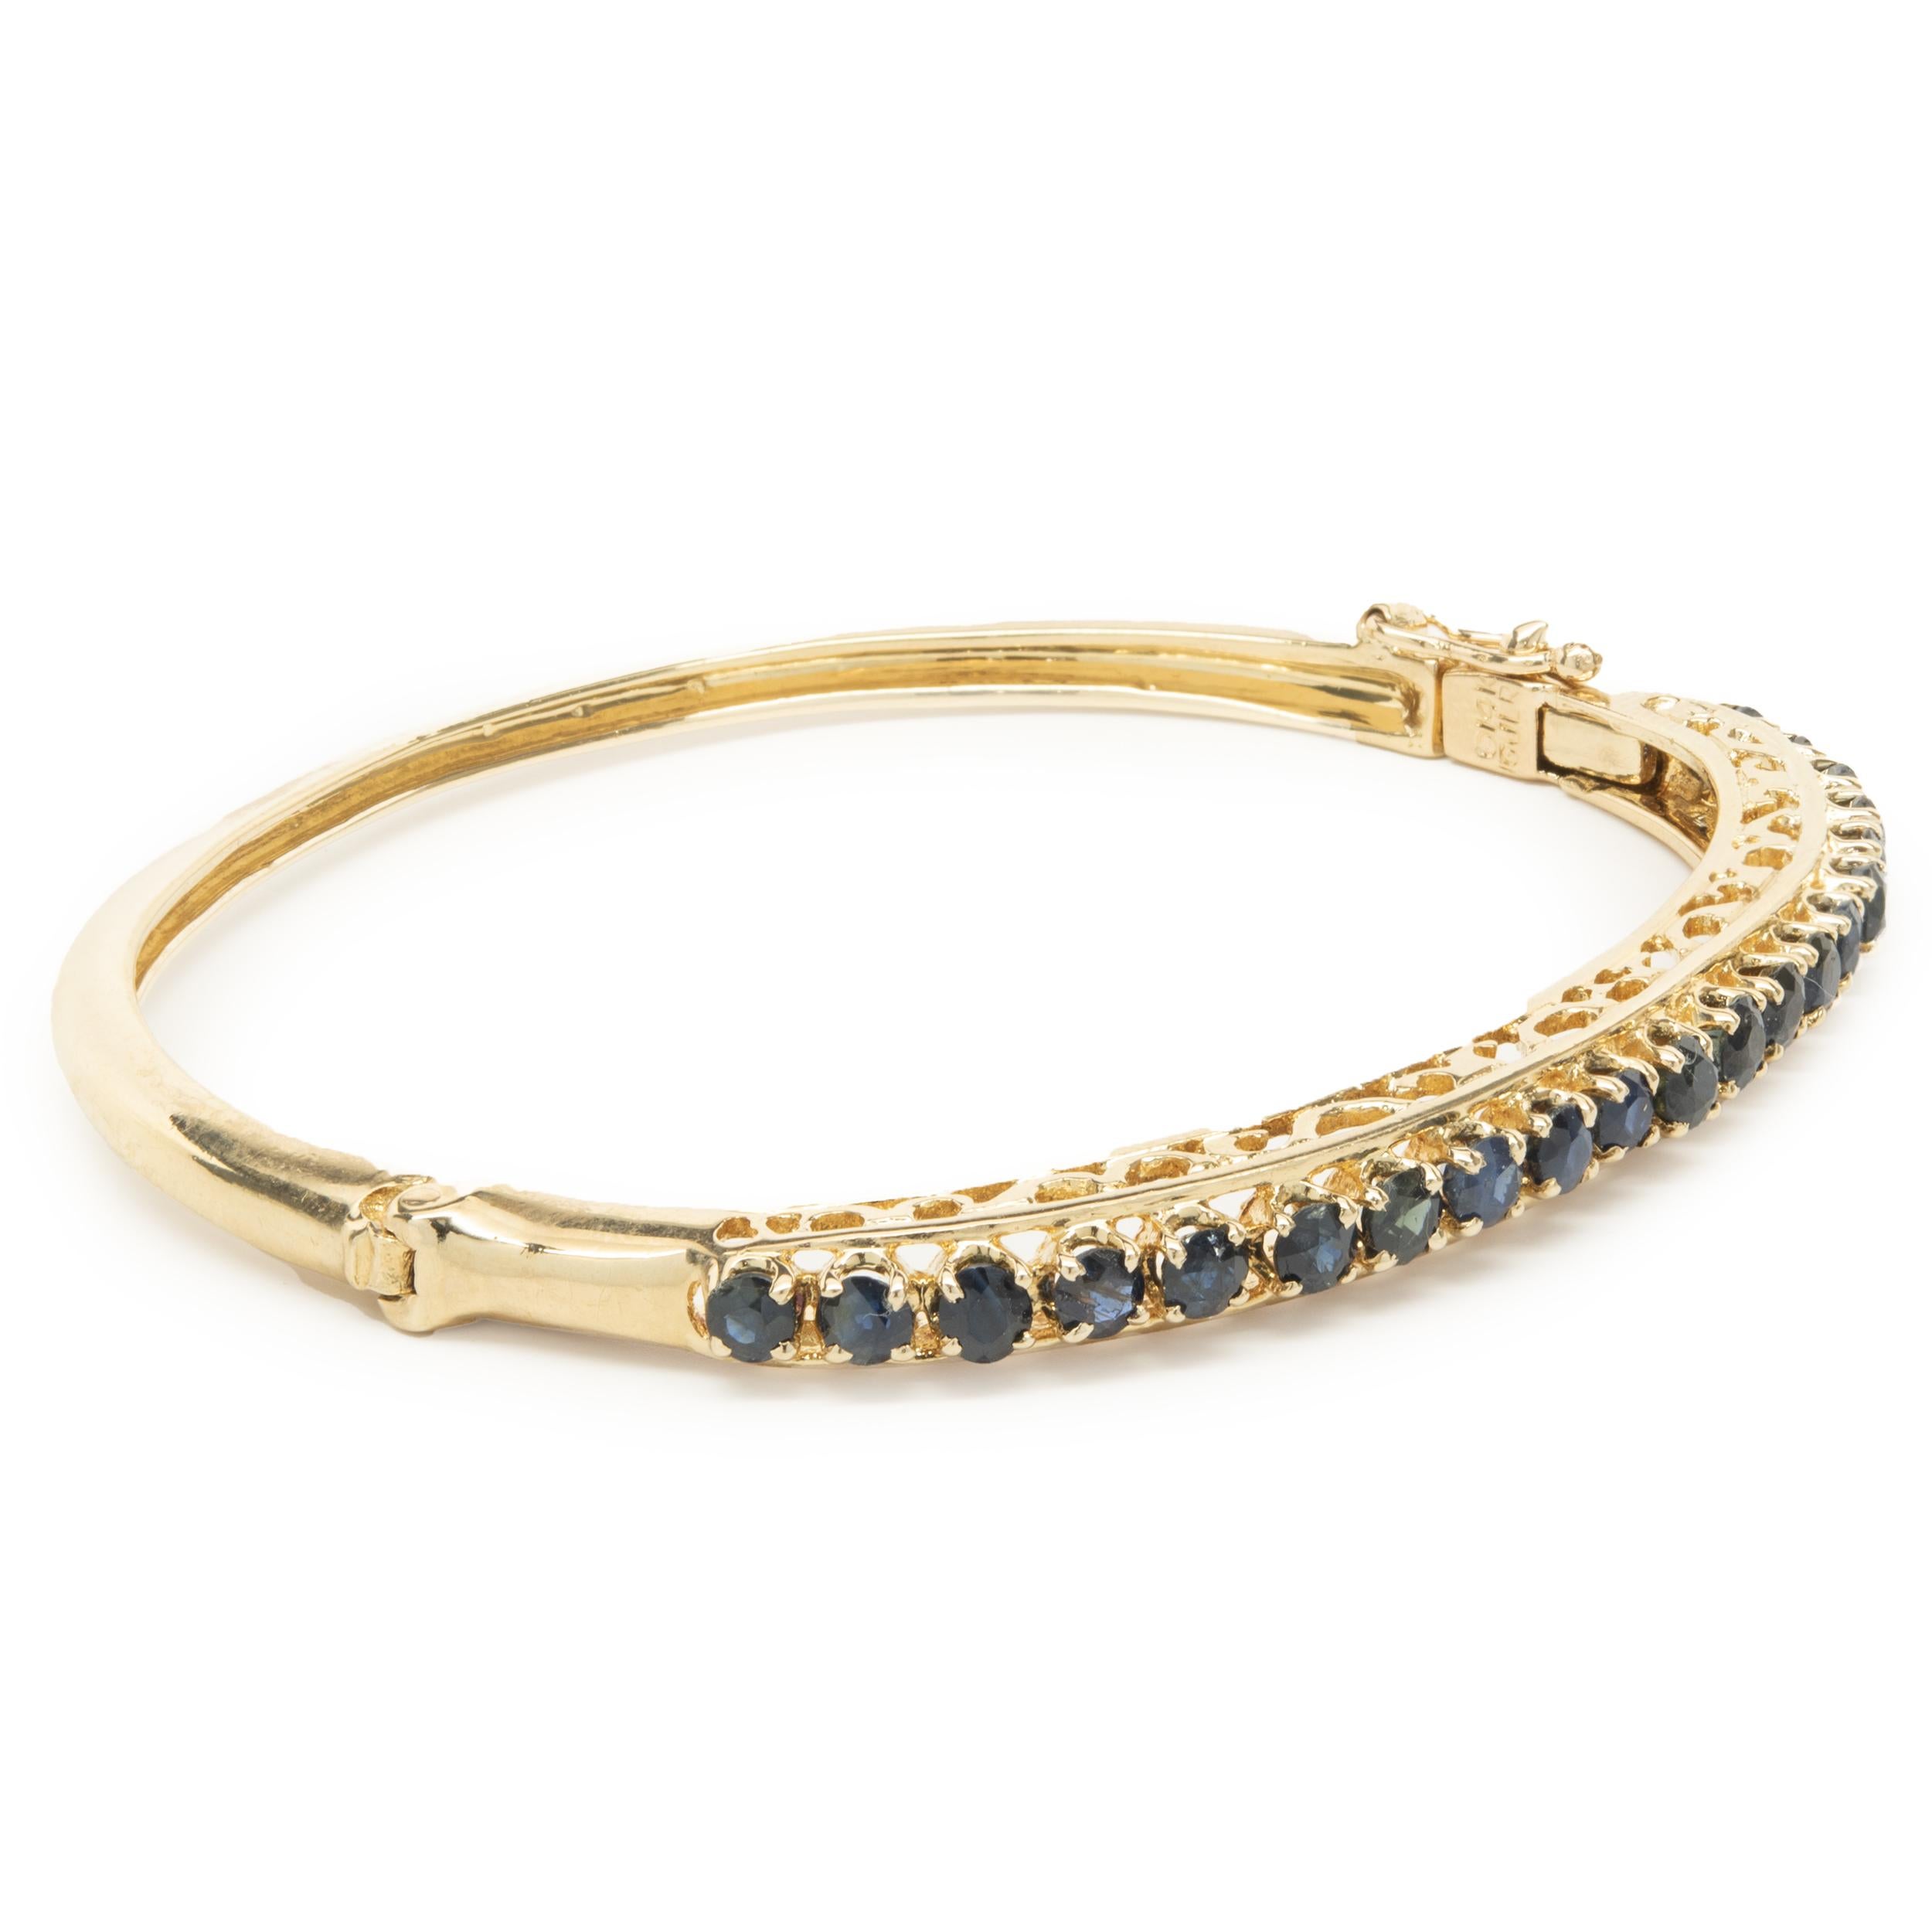 Designer: custom 
Material: 14K yellow gold
Sapphire: 21 round cut = 1.89cttw
Dimensions: bracelet will fit up to a 7-inch wrist
Weight: 15.85 grams